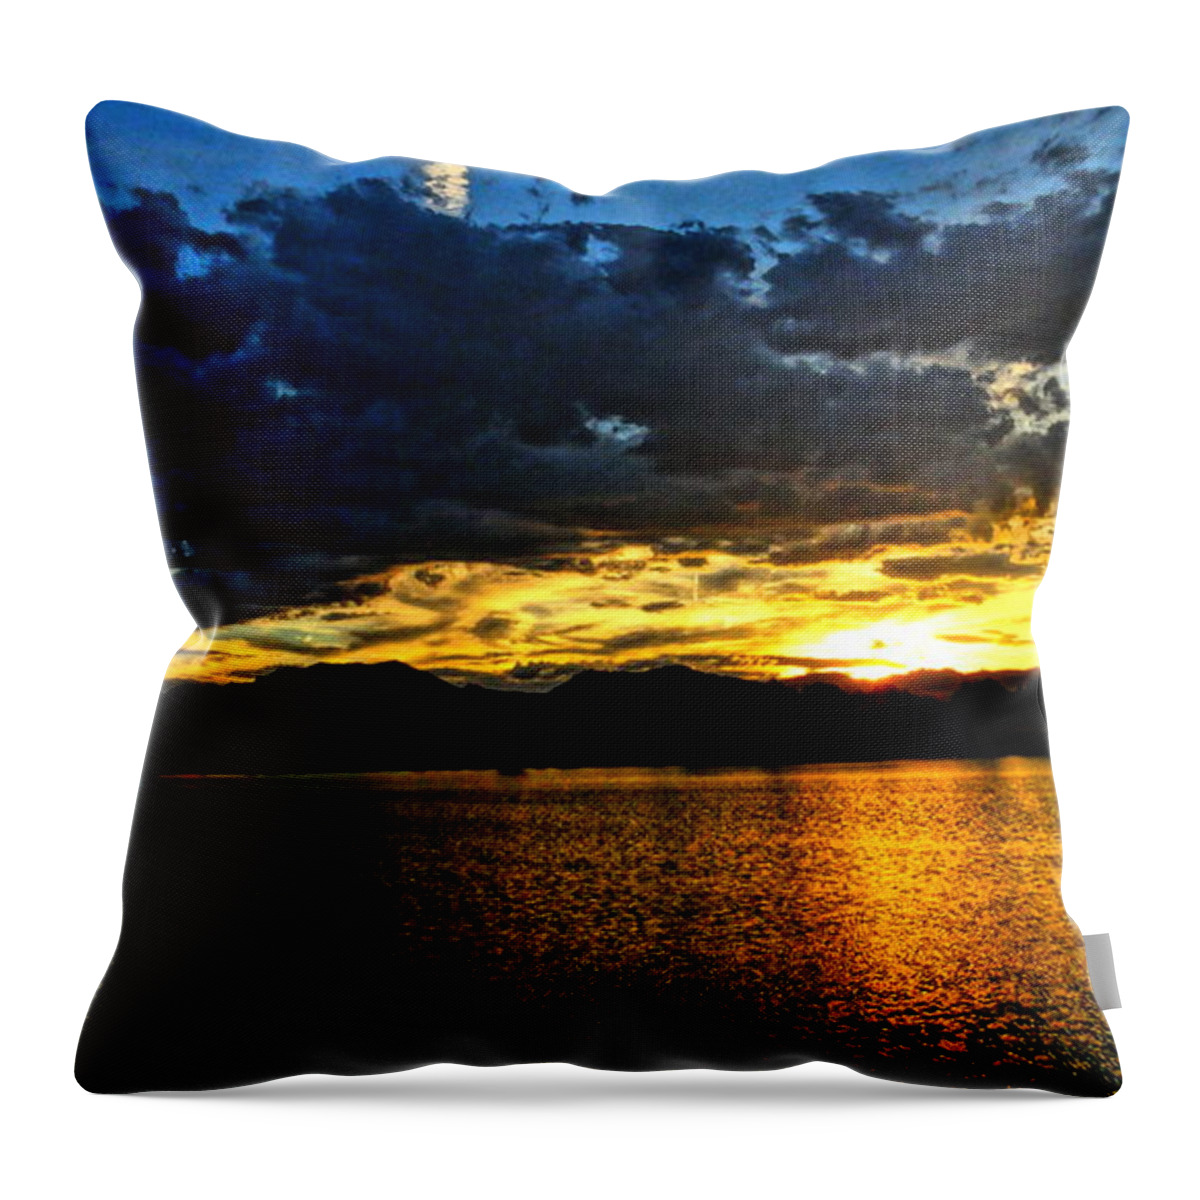 Colorado Mountain Sunset Throw Pillow featuring the photograph Love Lake by Eric Dee